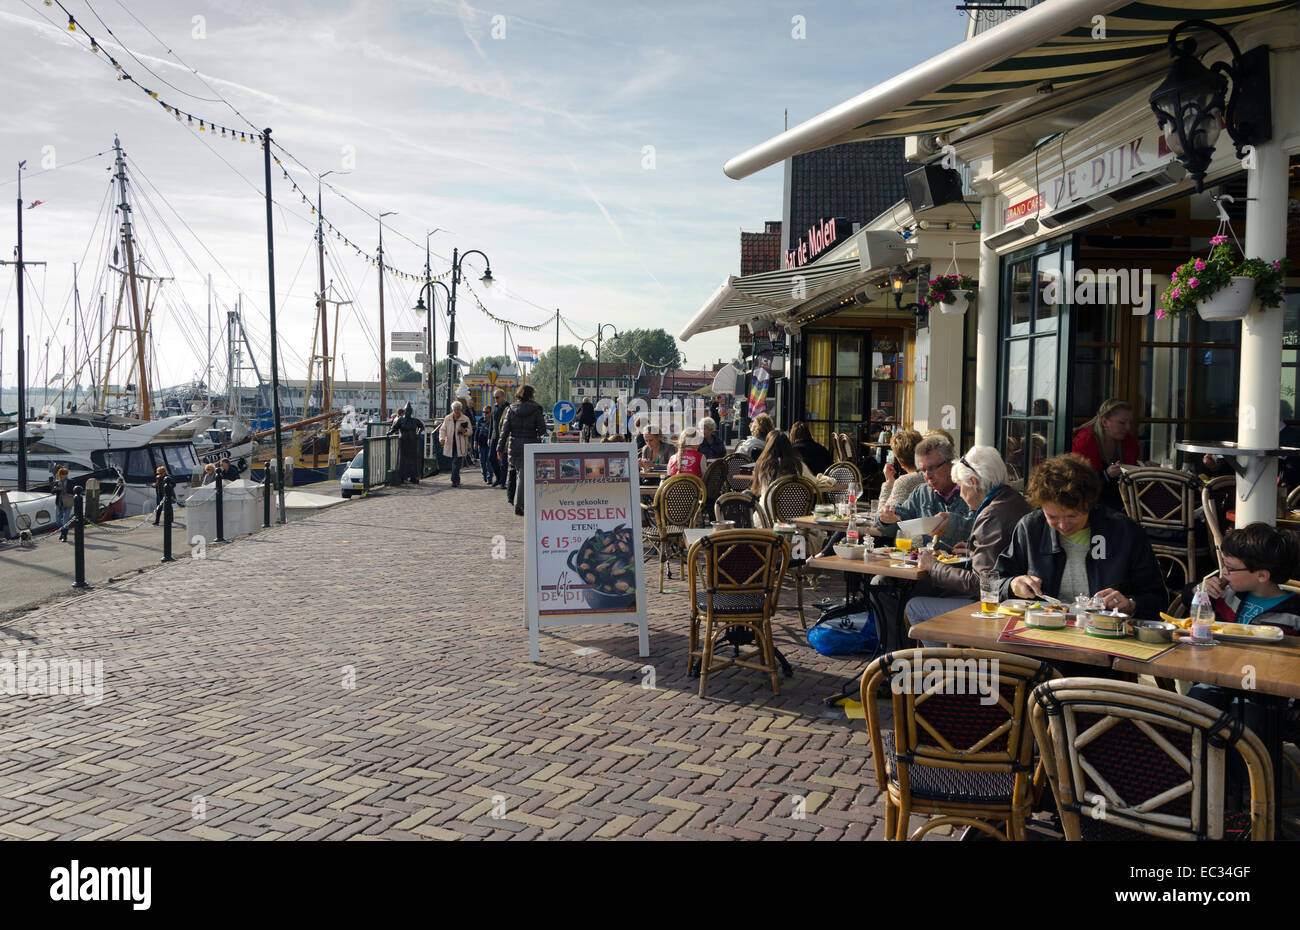 VOLENDAM, NETHERLANDS - OCTOBER 22: A view of a street of Volendam on October 22, 2013. Volendam is world famous thanks to its t Stock Photo